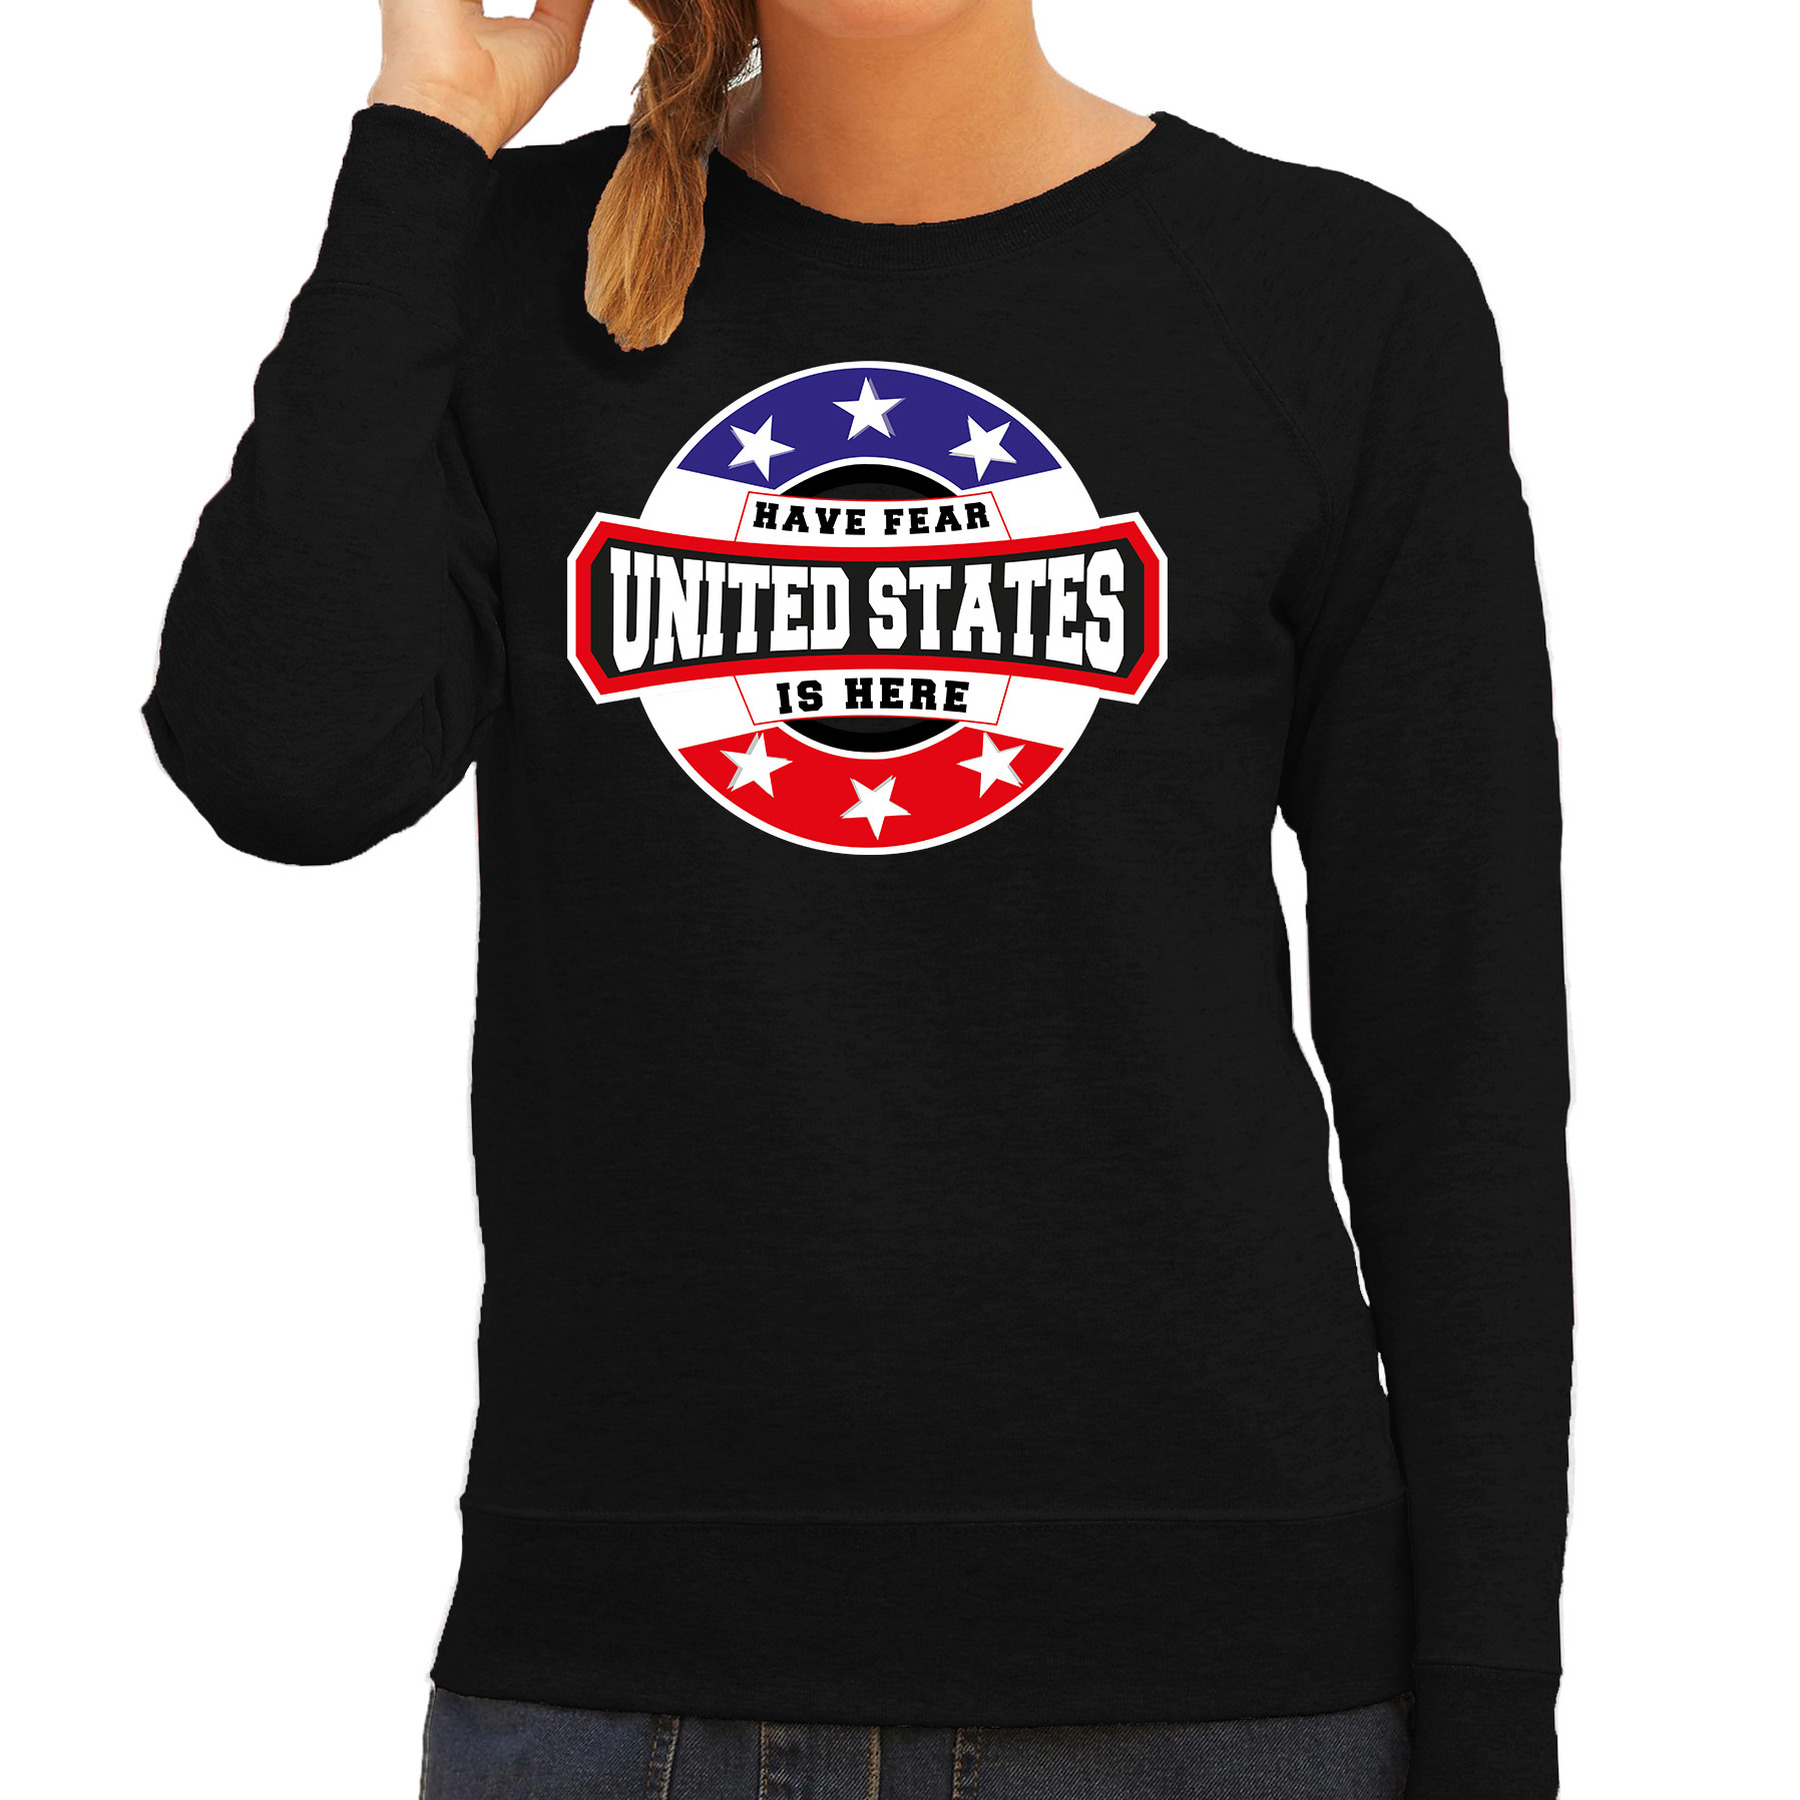 Have fear United States is here - Amerika supporter sweater zwart voor dames